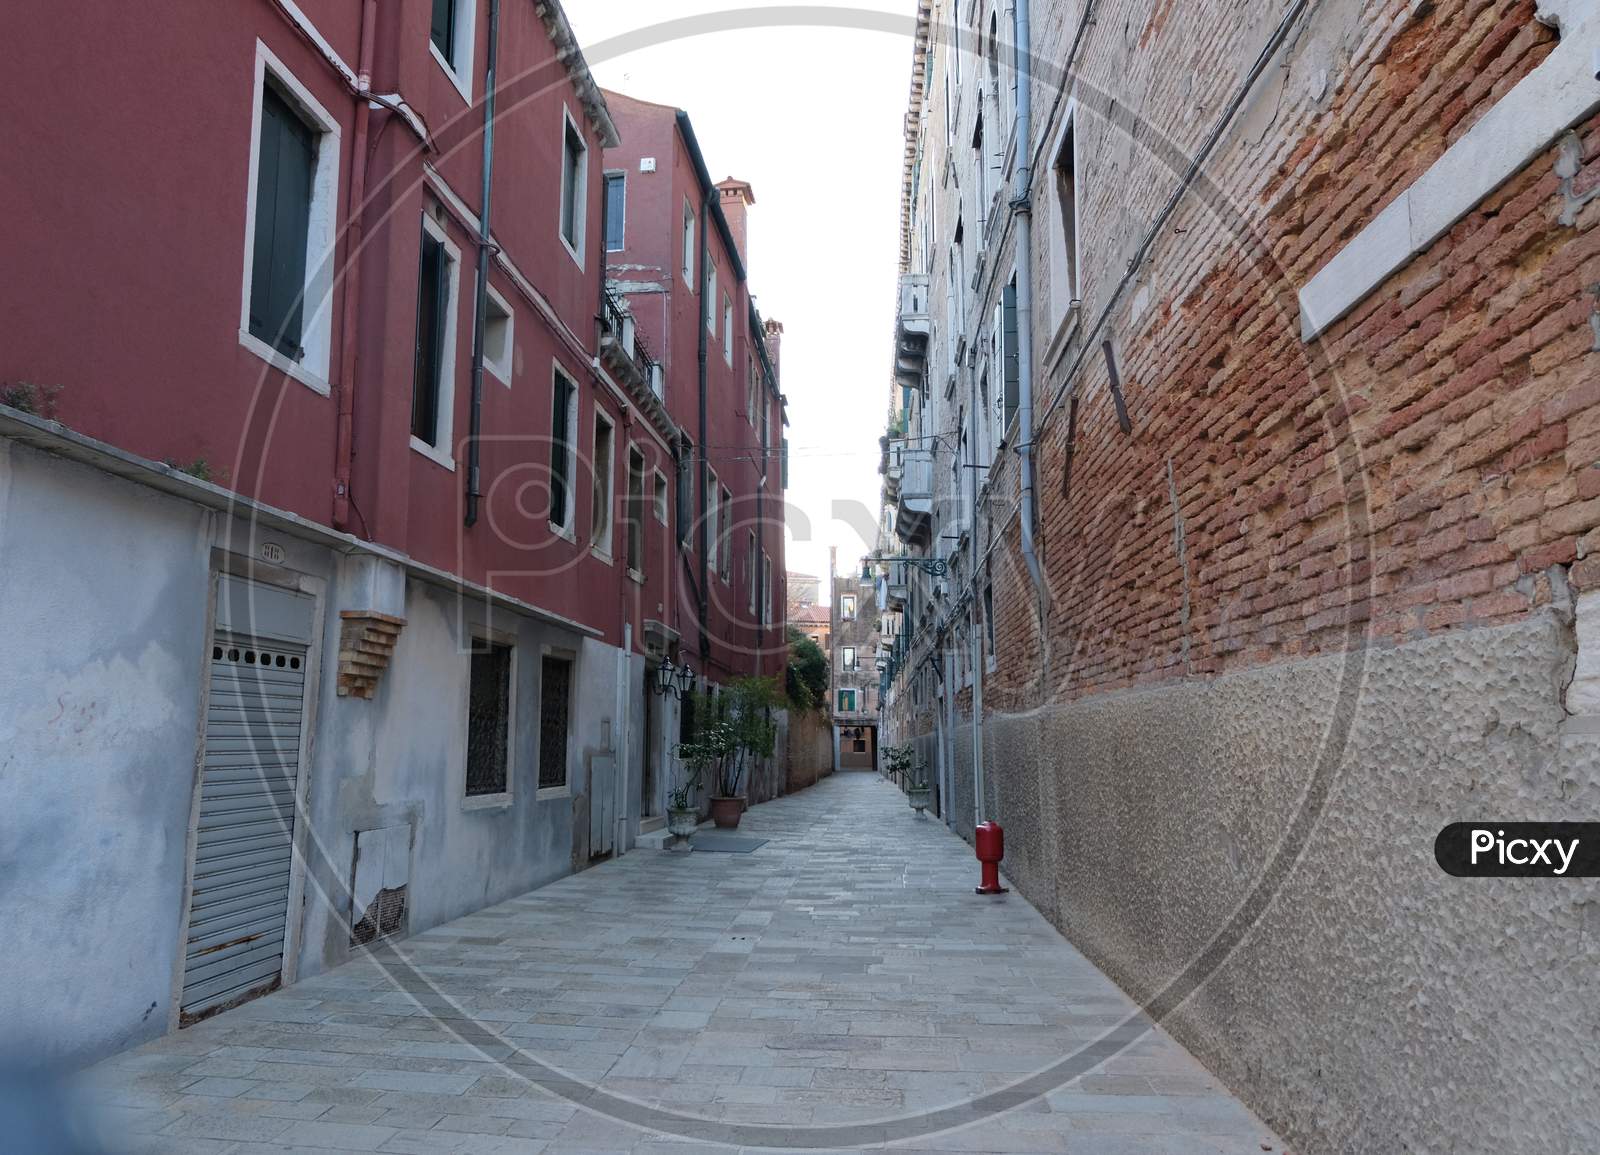 The rare silent street view of Venice